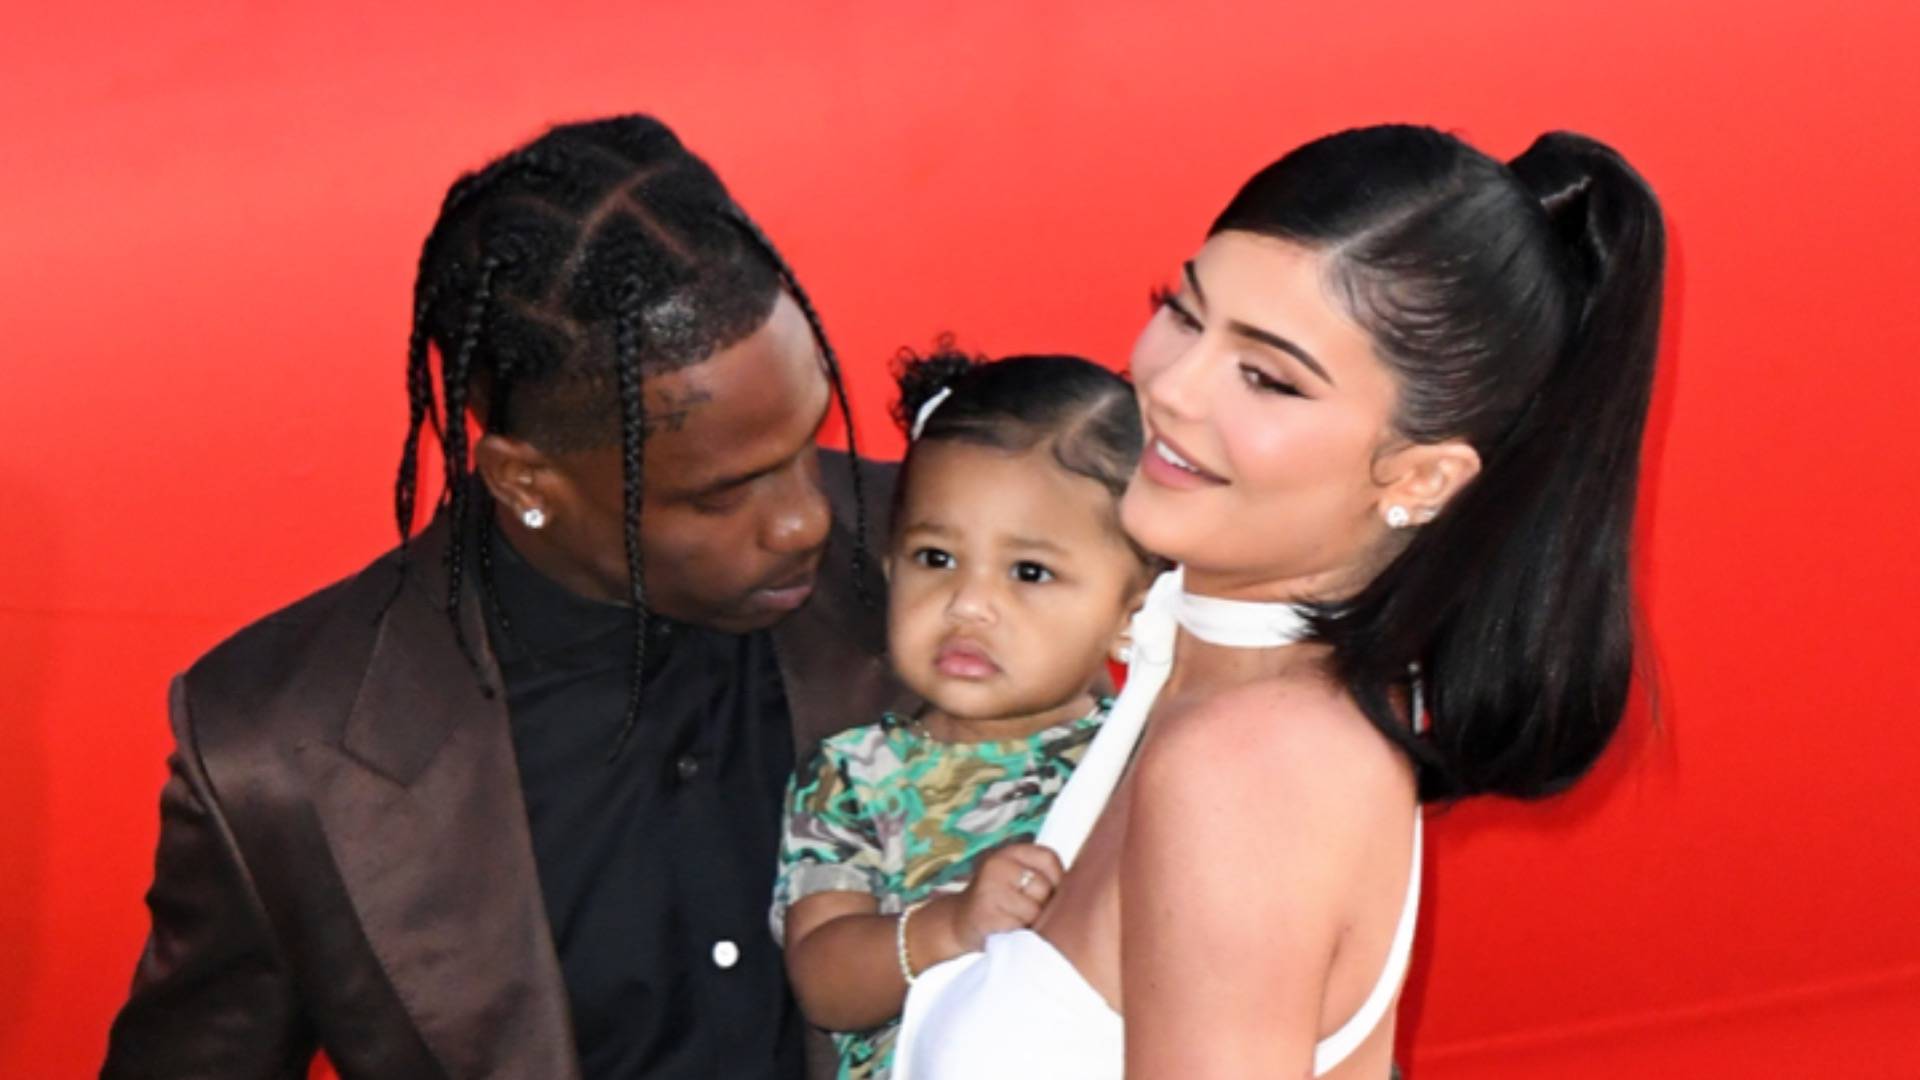 Travis Scott and Kylie Jenner posing with Stormi in front of red background